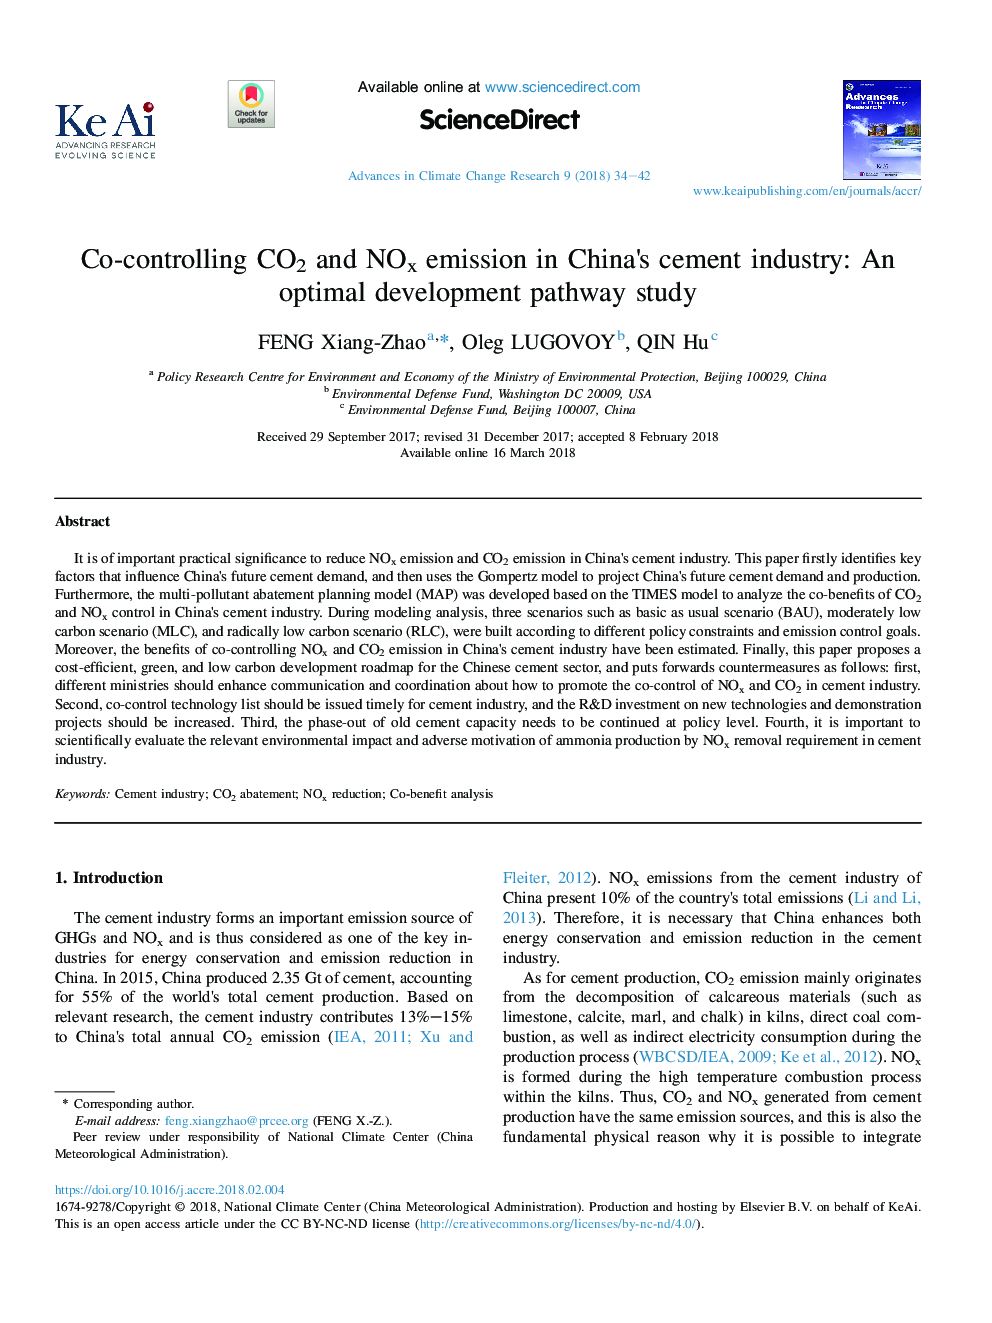 Co-controlling CO2 and NOx emission in China's cement industry: An optimal development pathway study